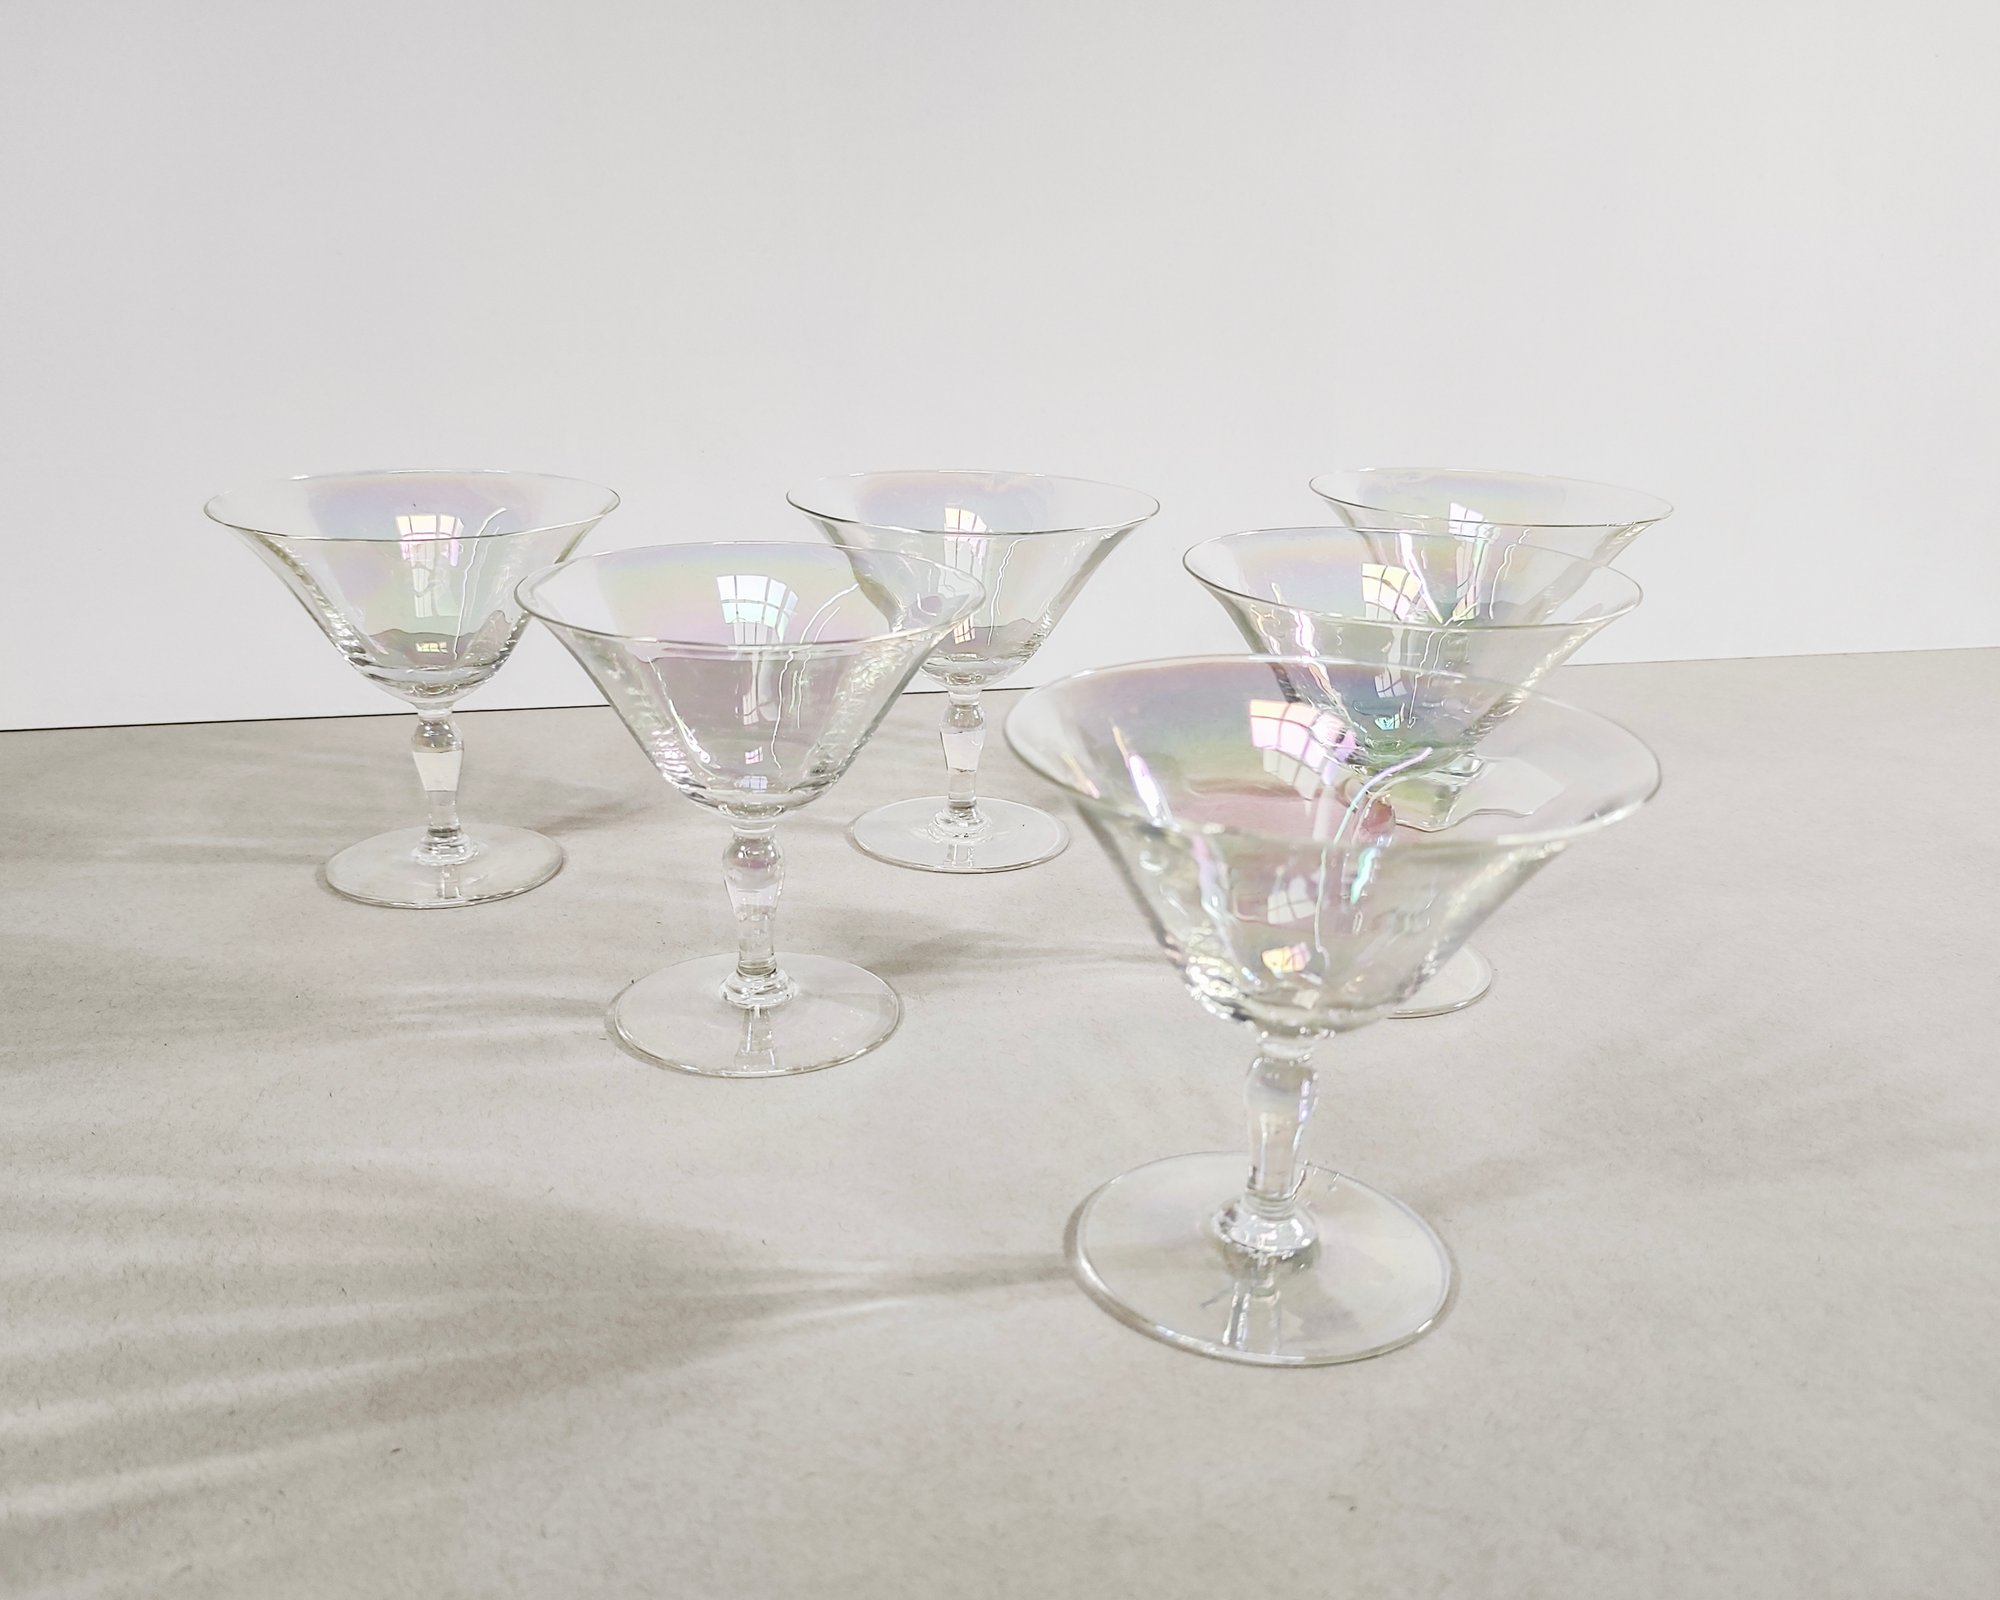 Perle Cocktail Glasses, Set of 6